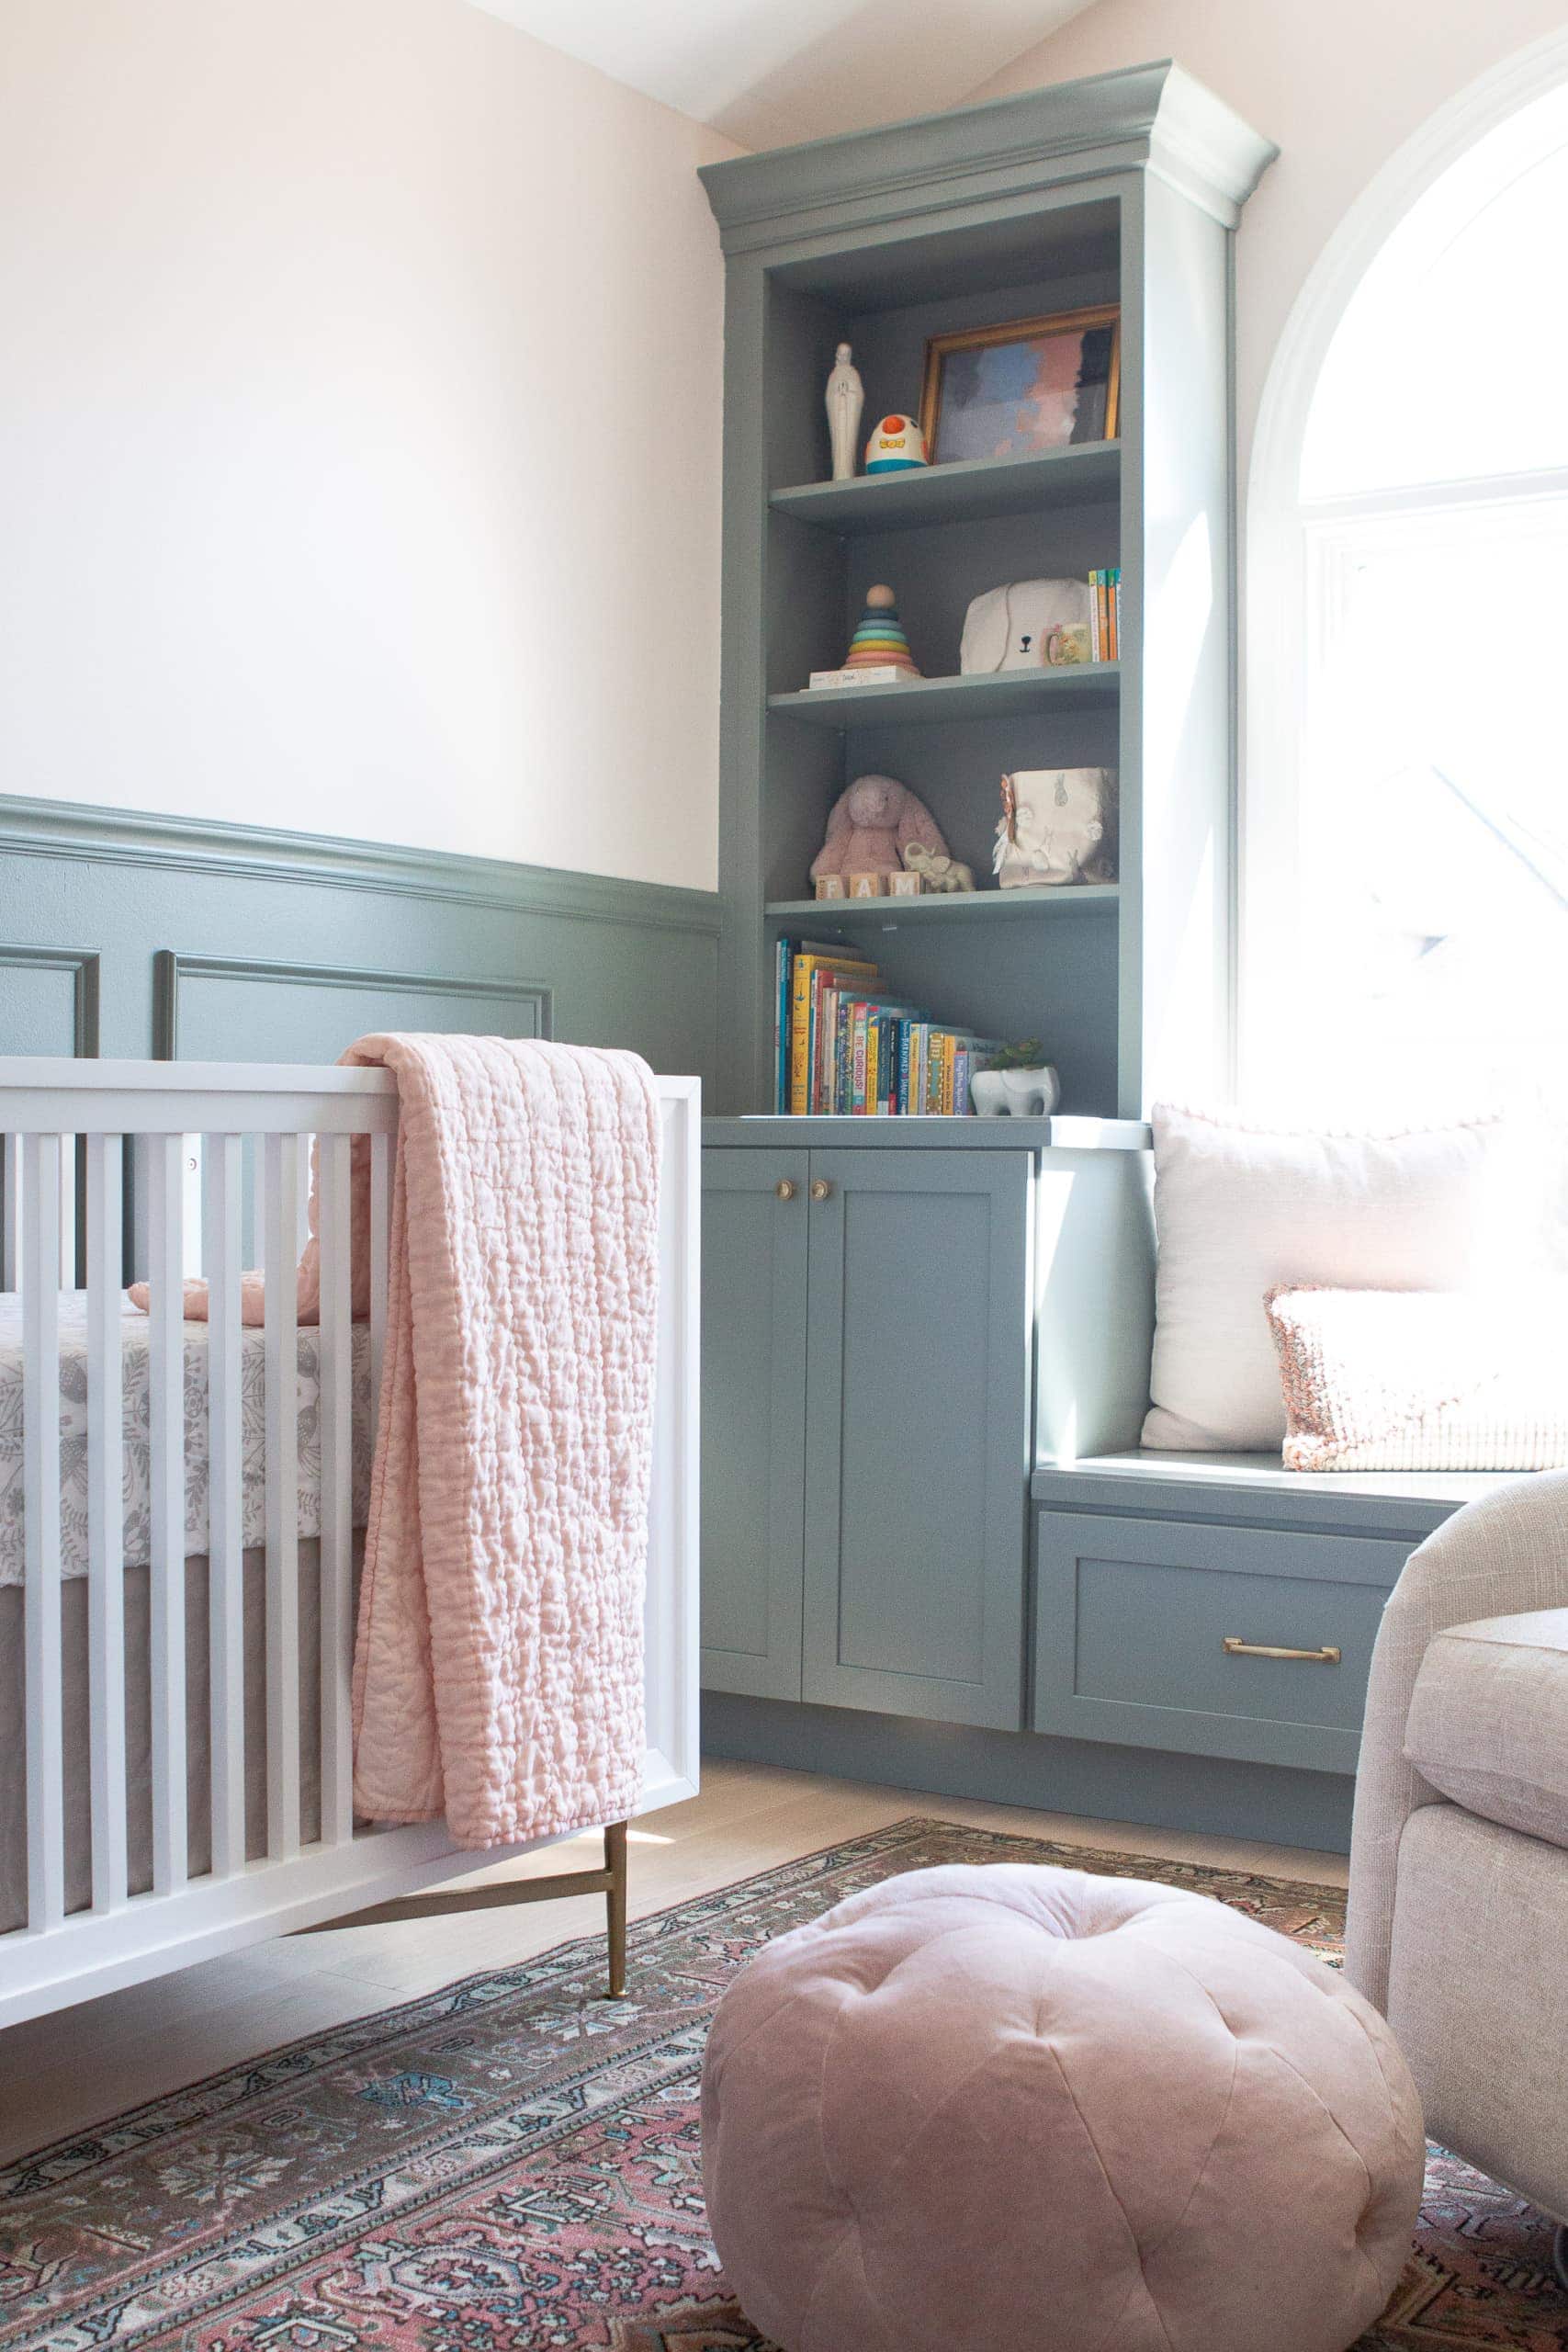 How to decorate shelves in a nursery